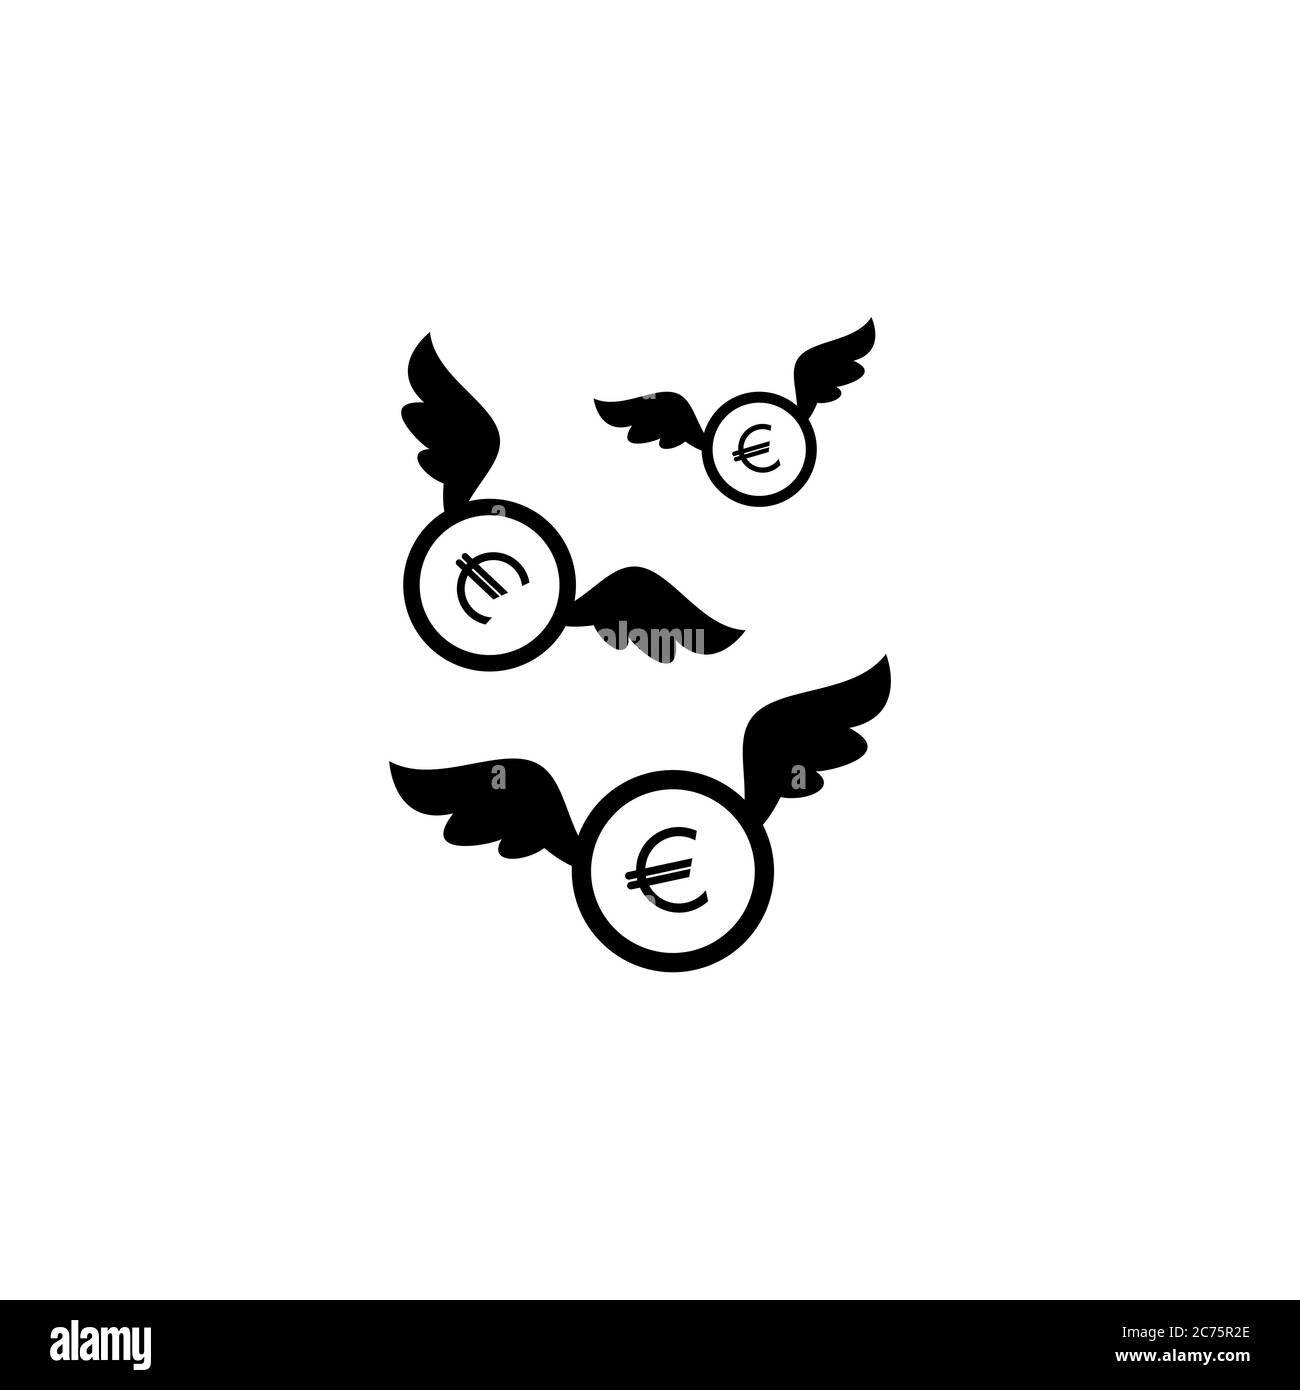 Black euro coins with white wings. Flat icon. Isolated on white background. Flying money. Economy, finance, money pictogram. Wealth symbol. Vector ill Stock Vector